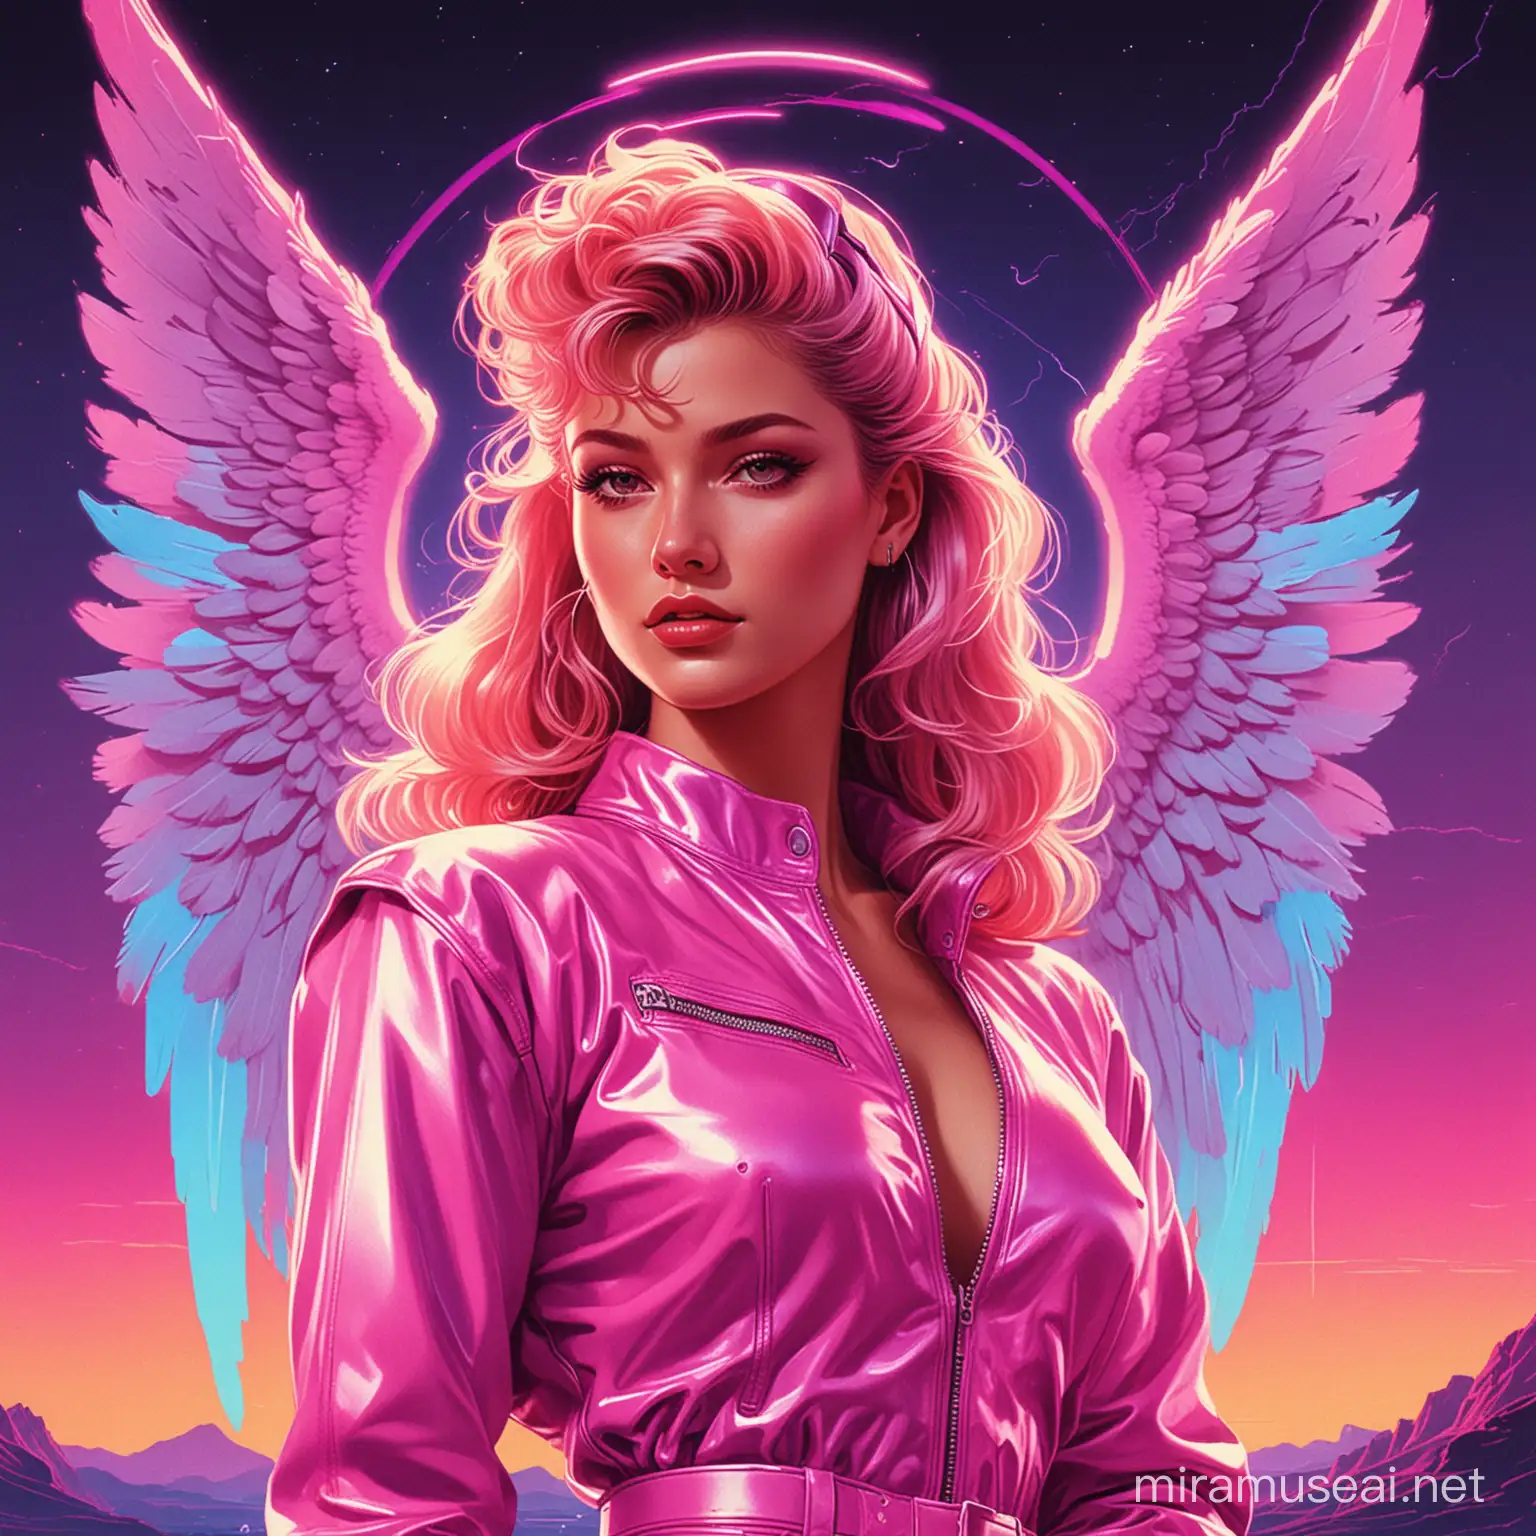 NeonLit 90s Synthwave Angel with Ethereal Wings